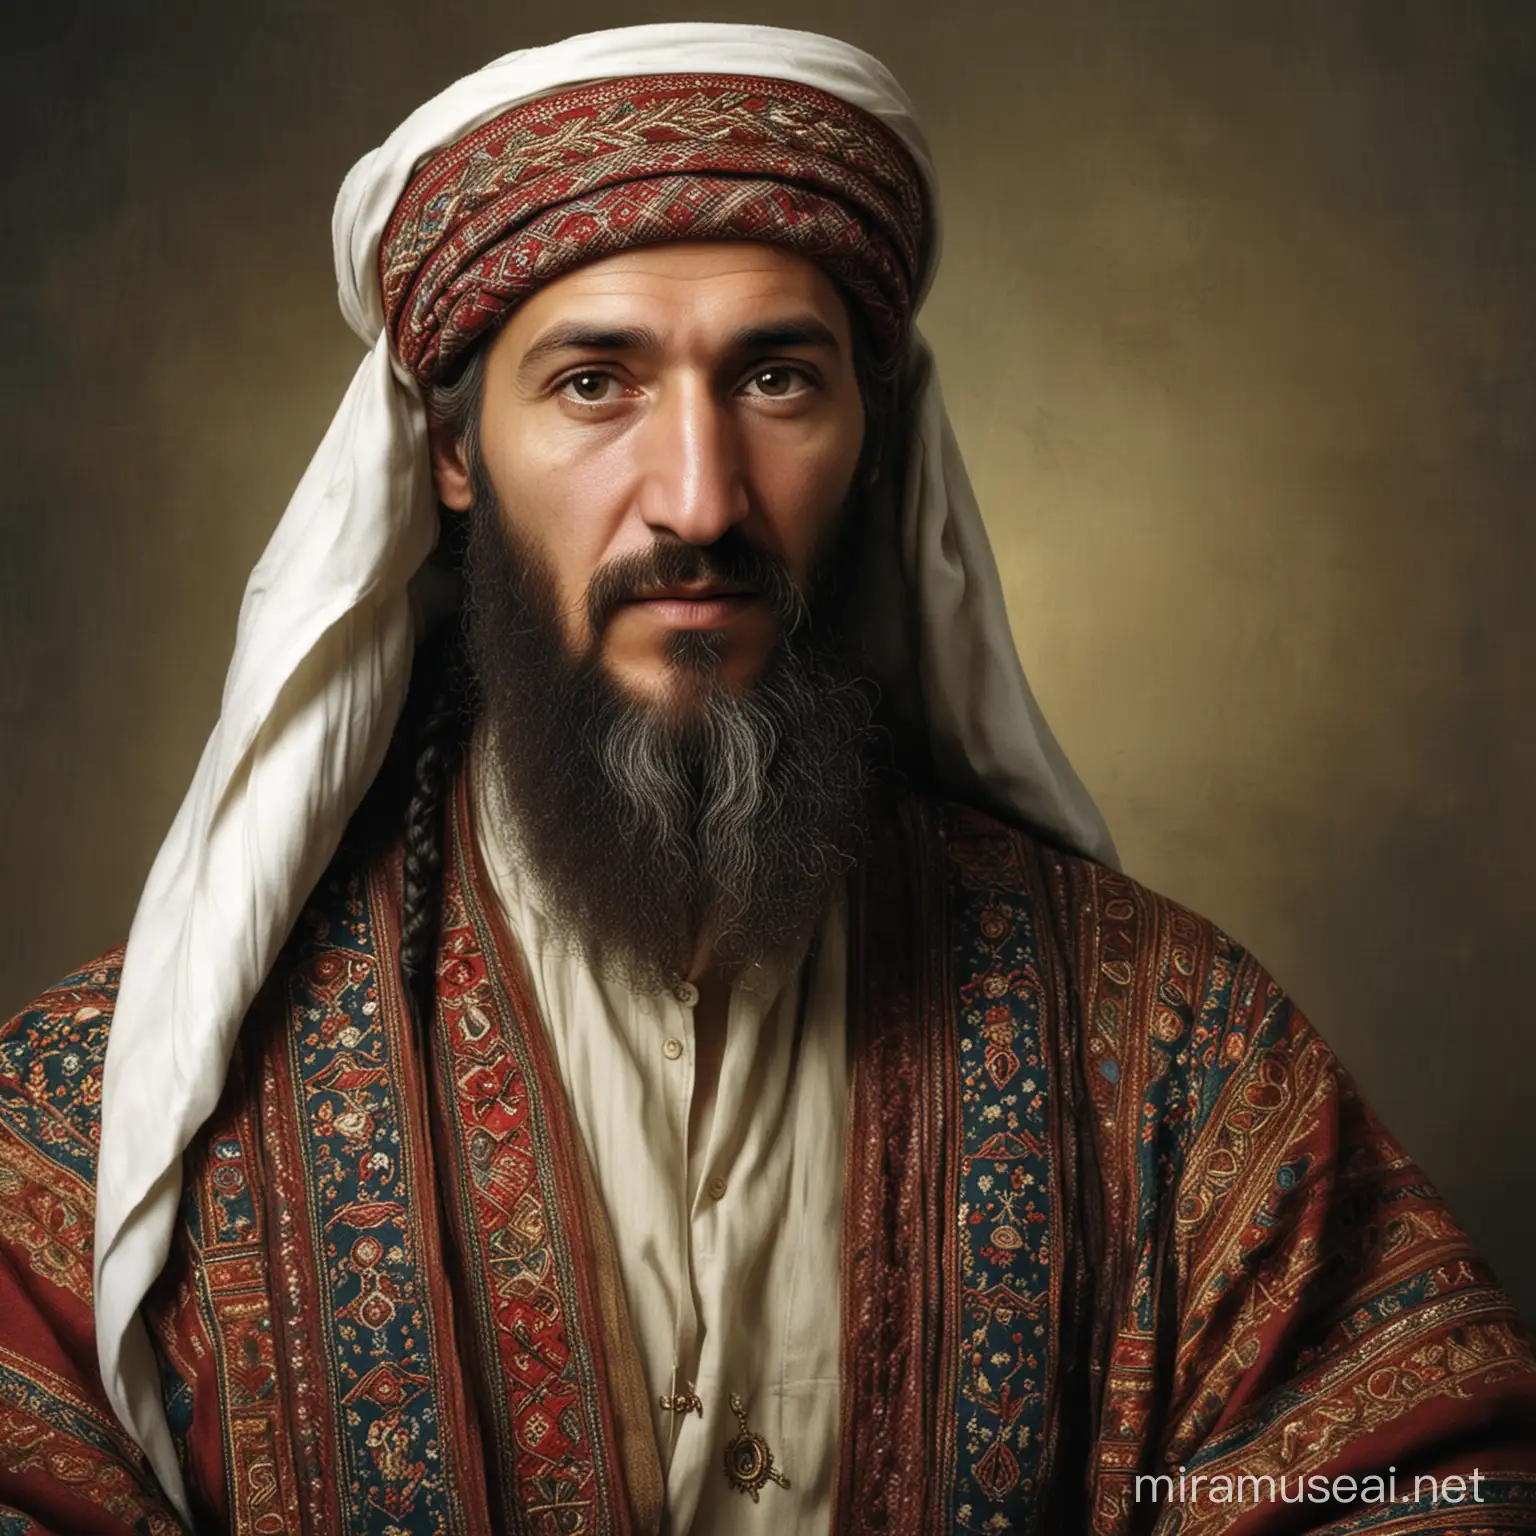 ben laden looking classical Ukrainian from the classical traditional national attributes